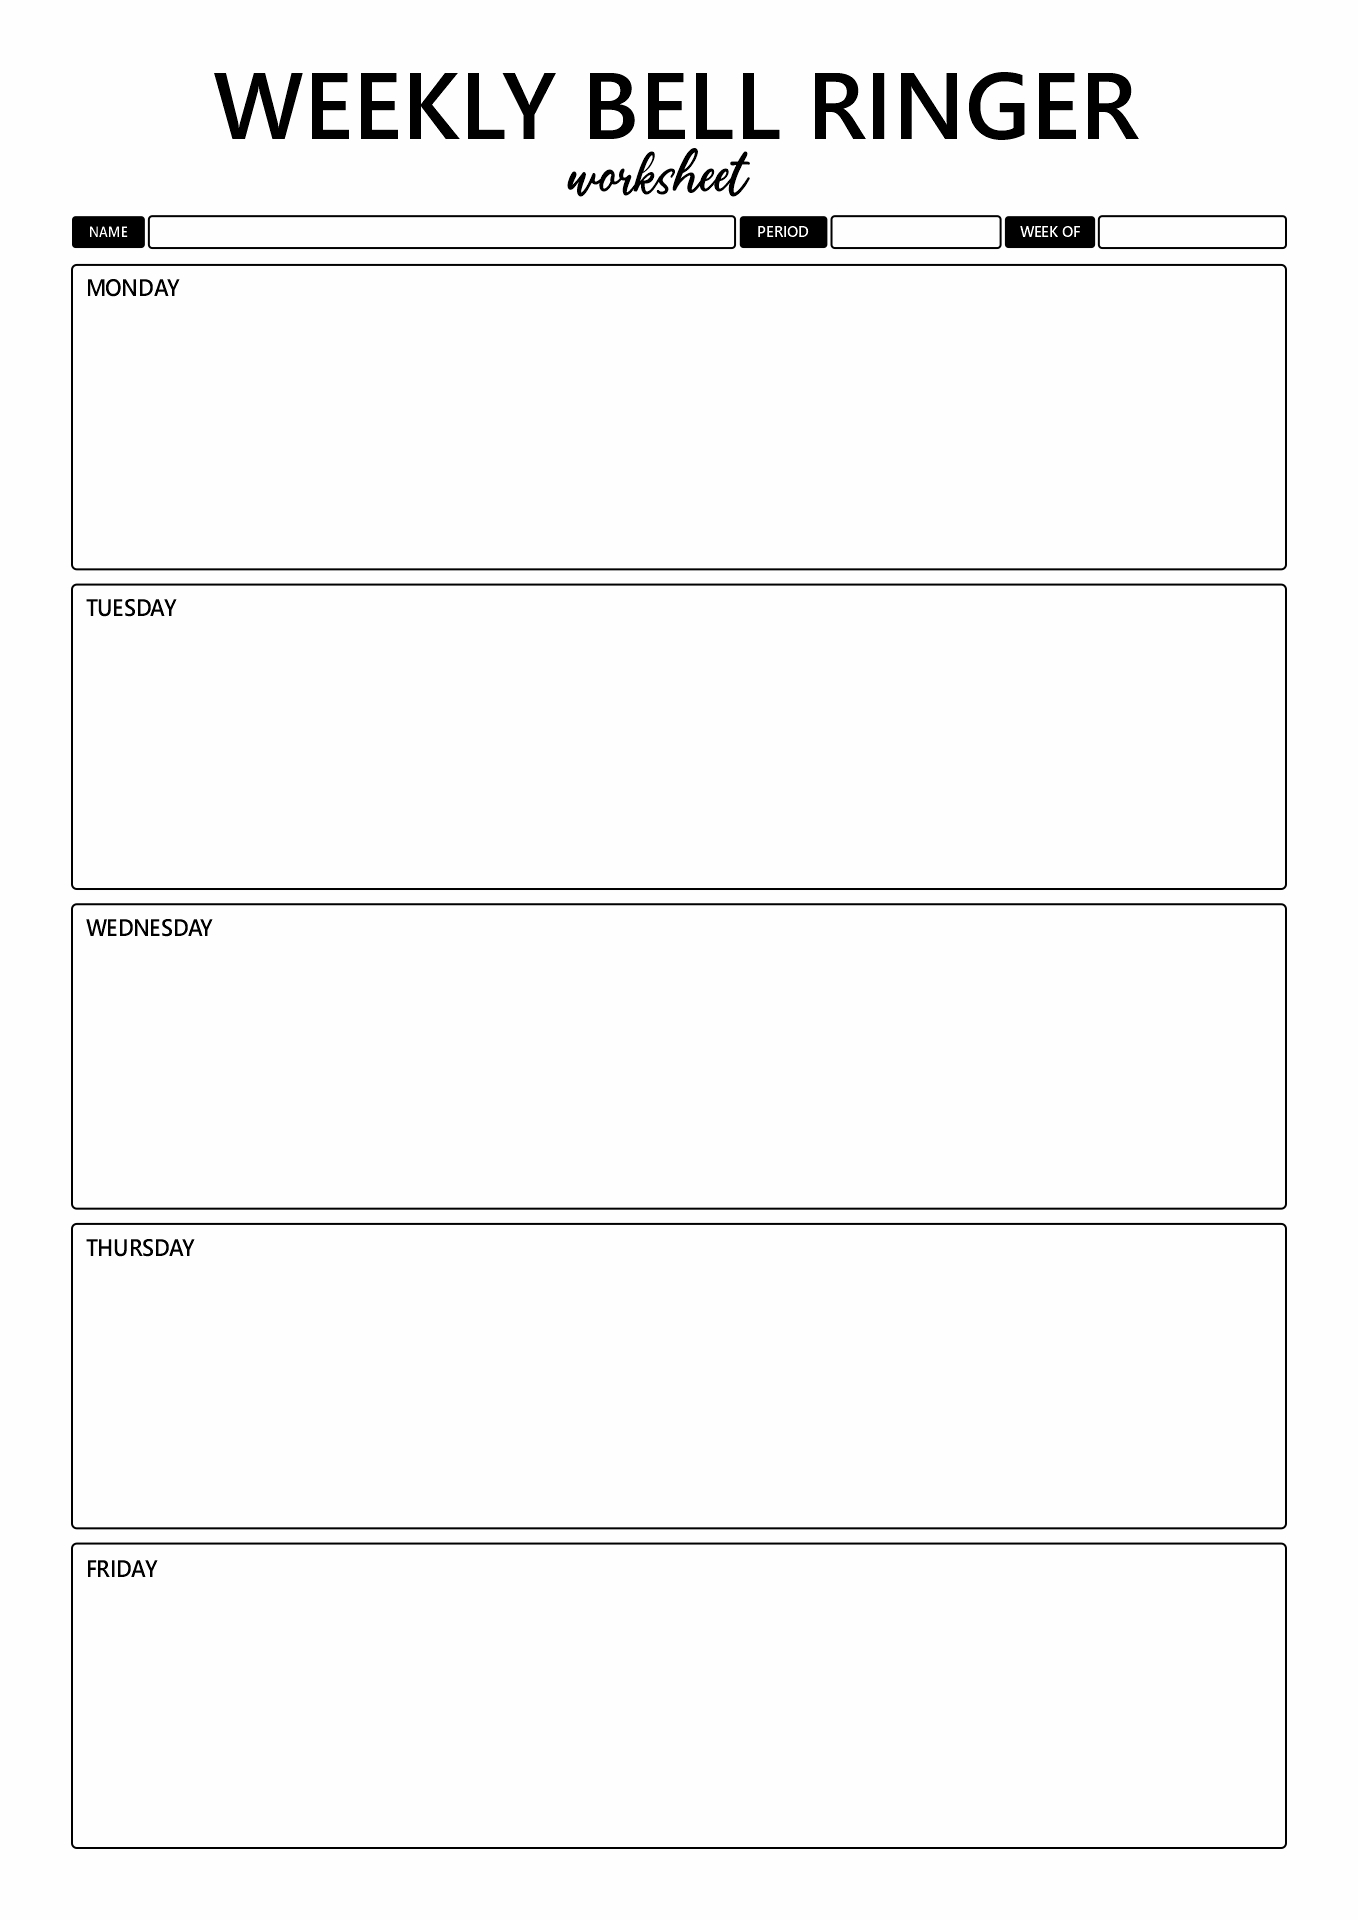 weekly-bell-ringer-template